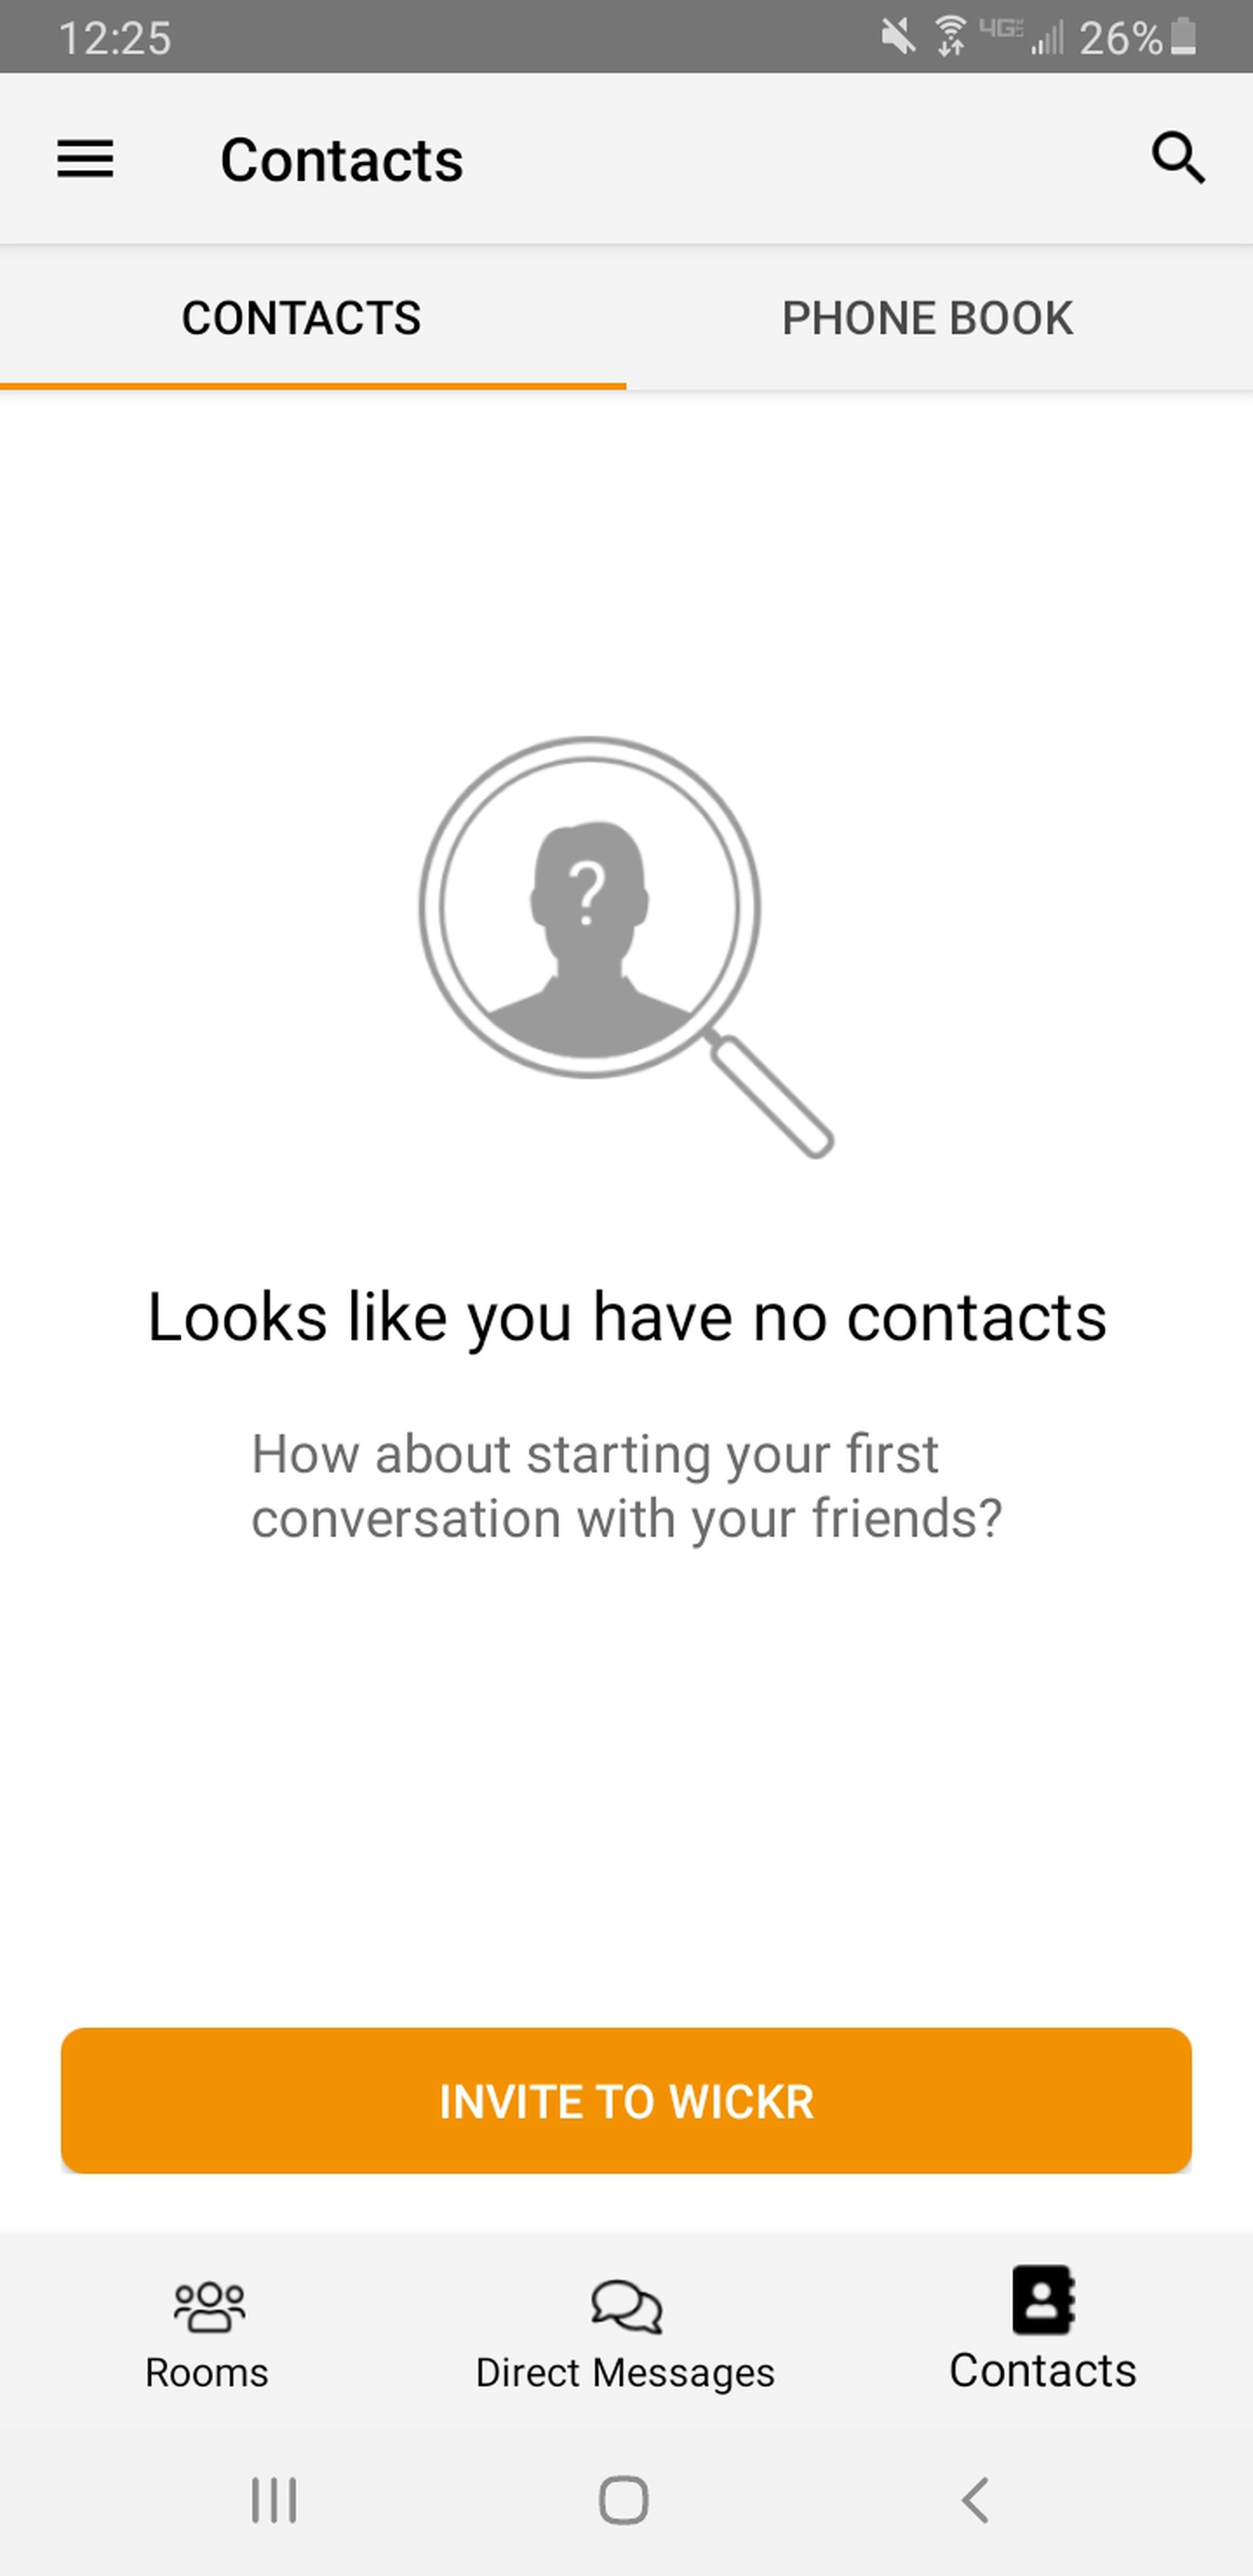 Here’s where your list of contacts should be.